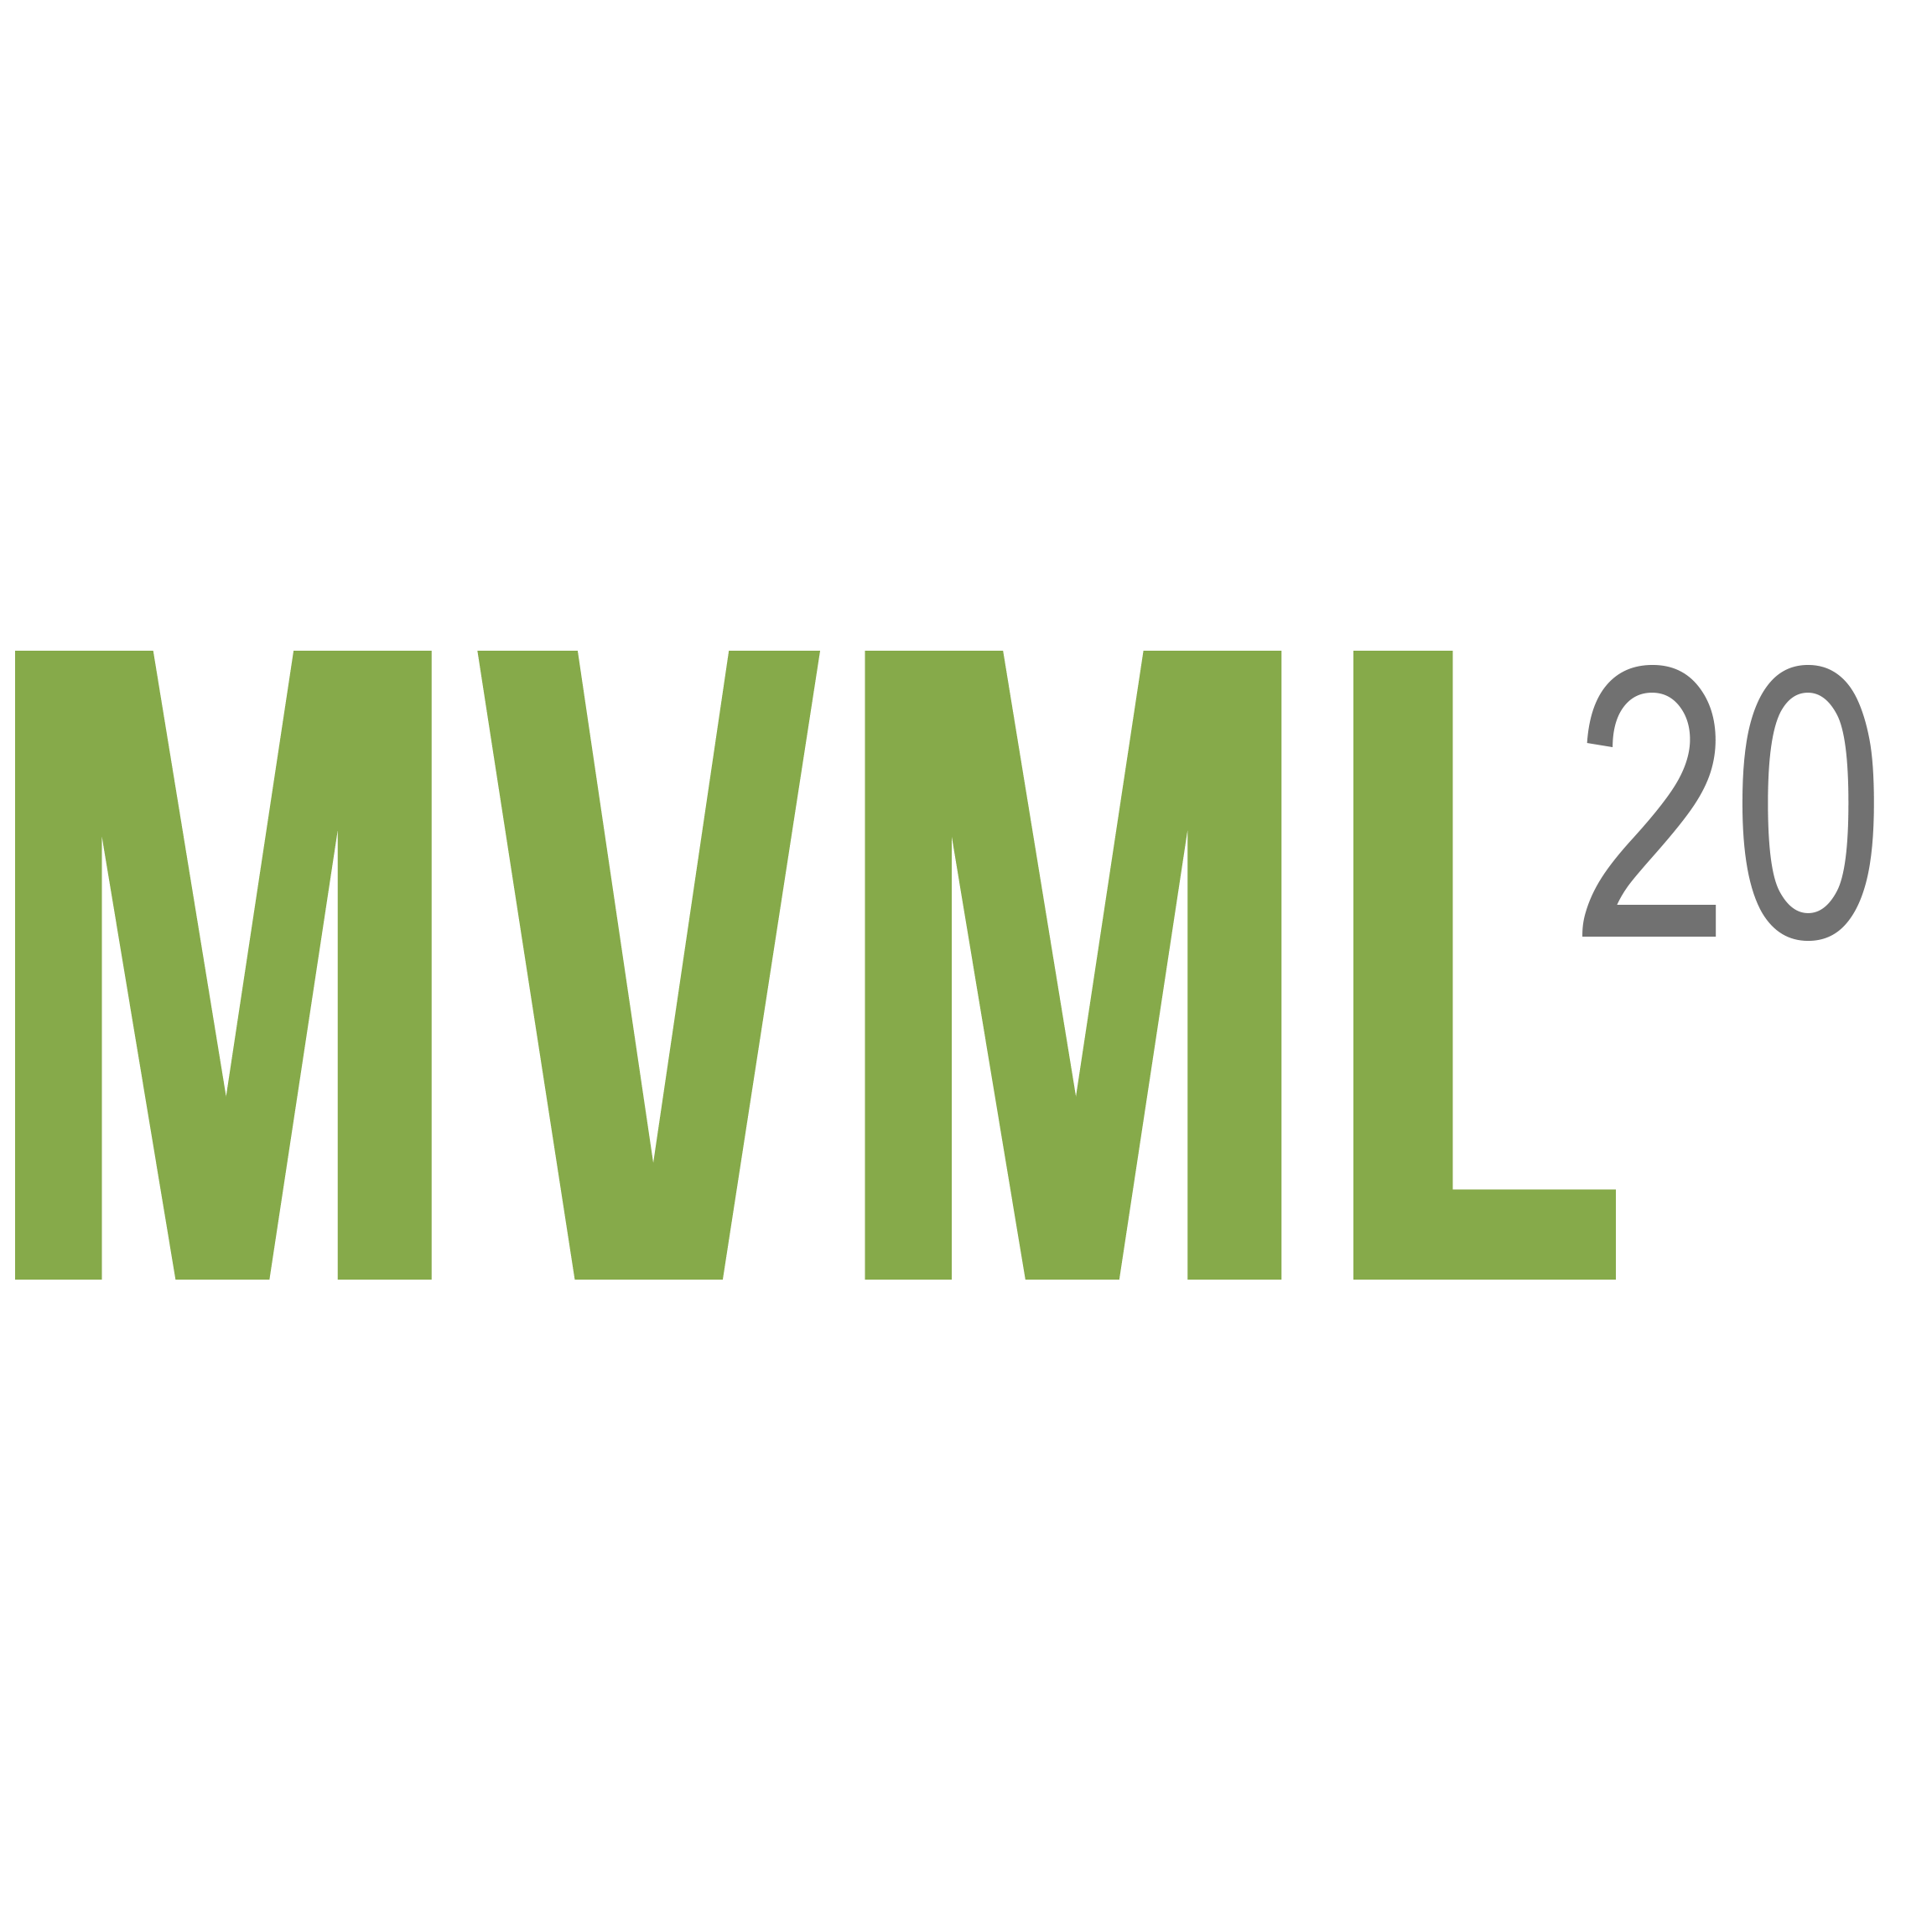 6th International Conference on Machine Vision and Machine Learning (MVML’20)